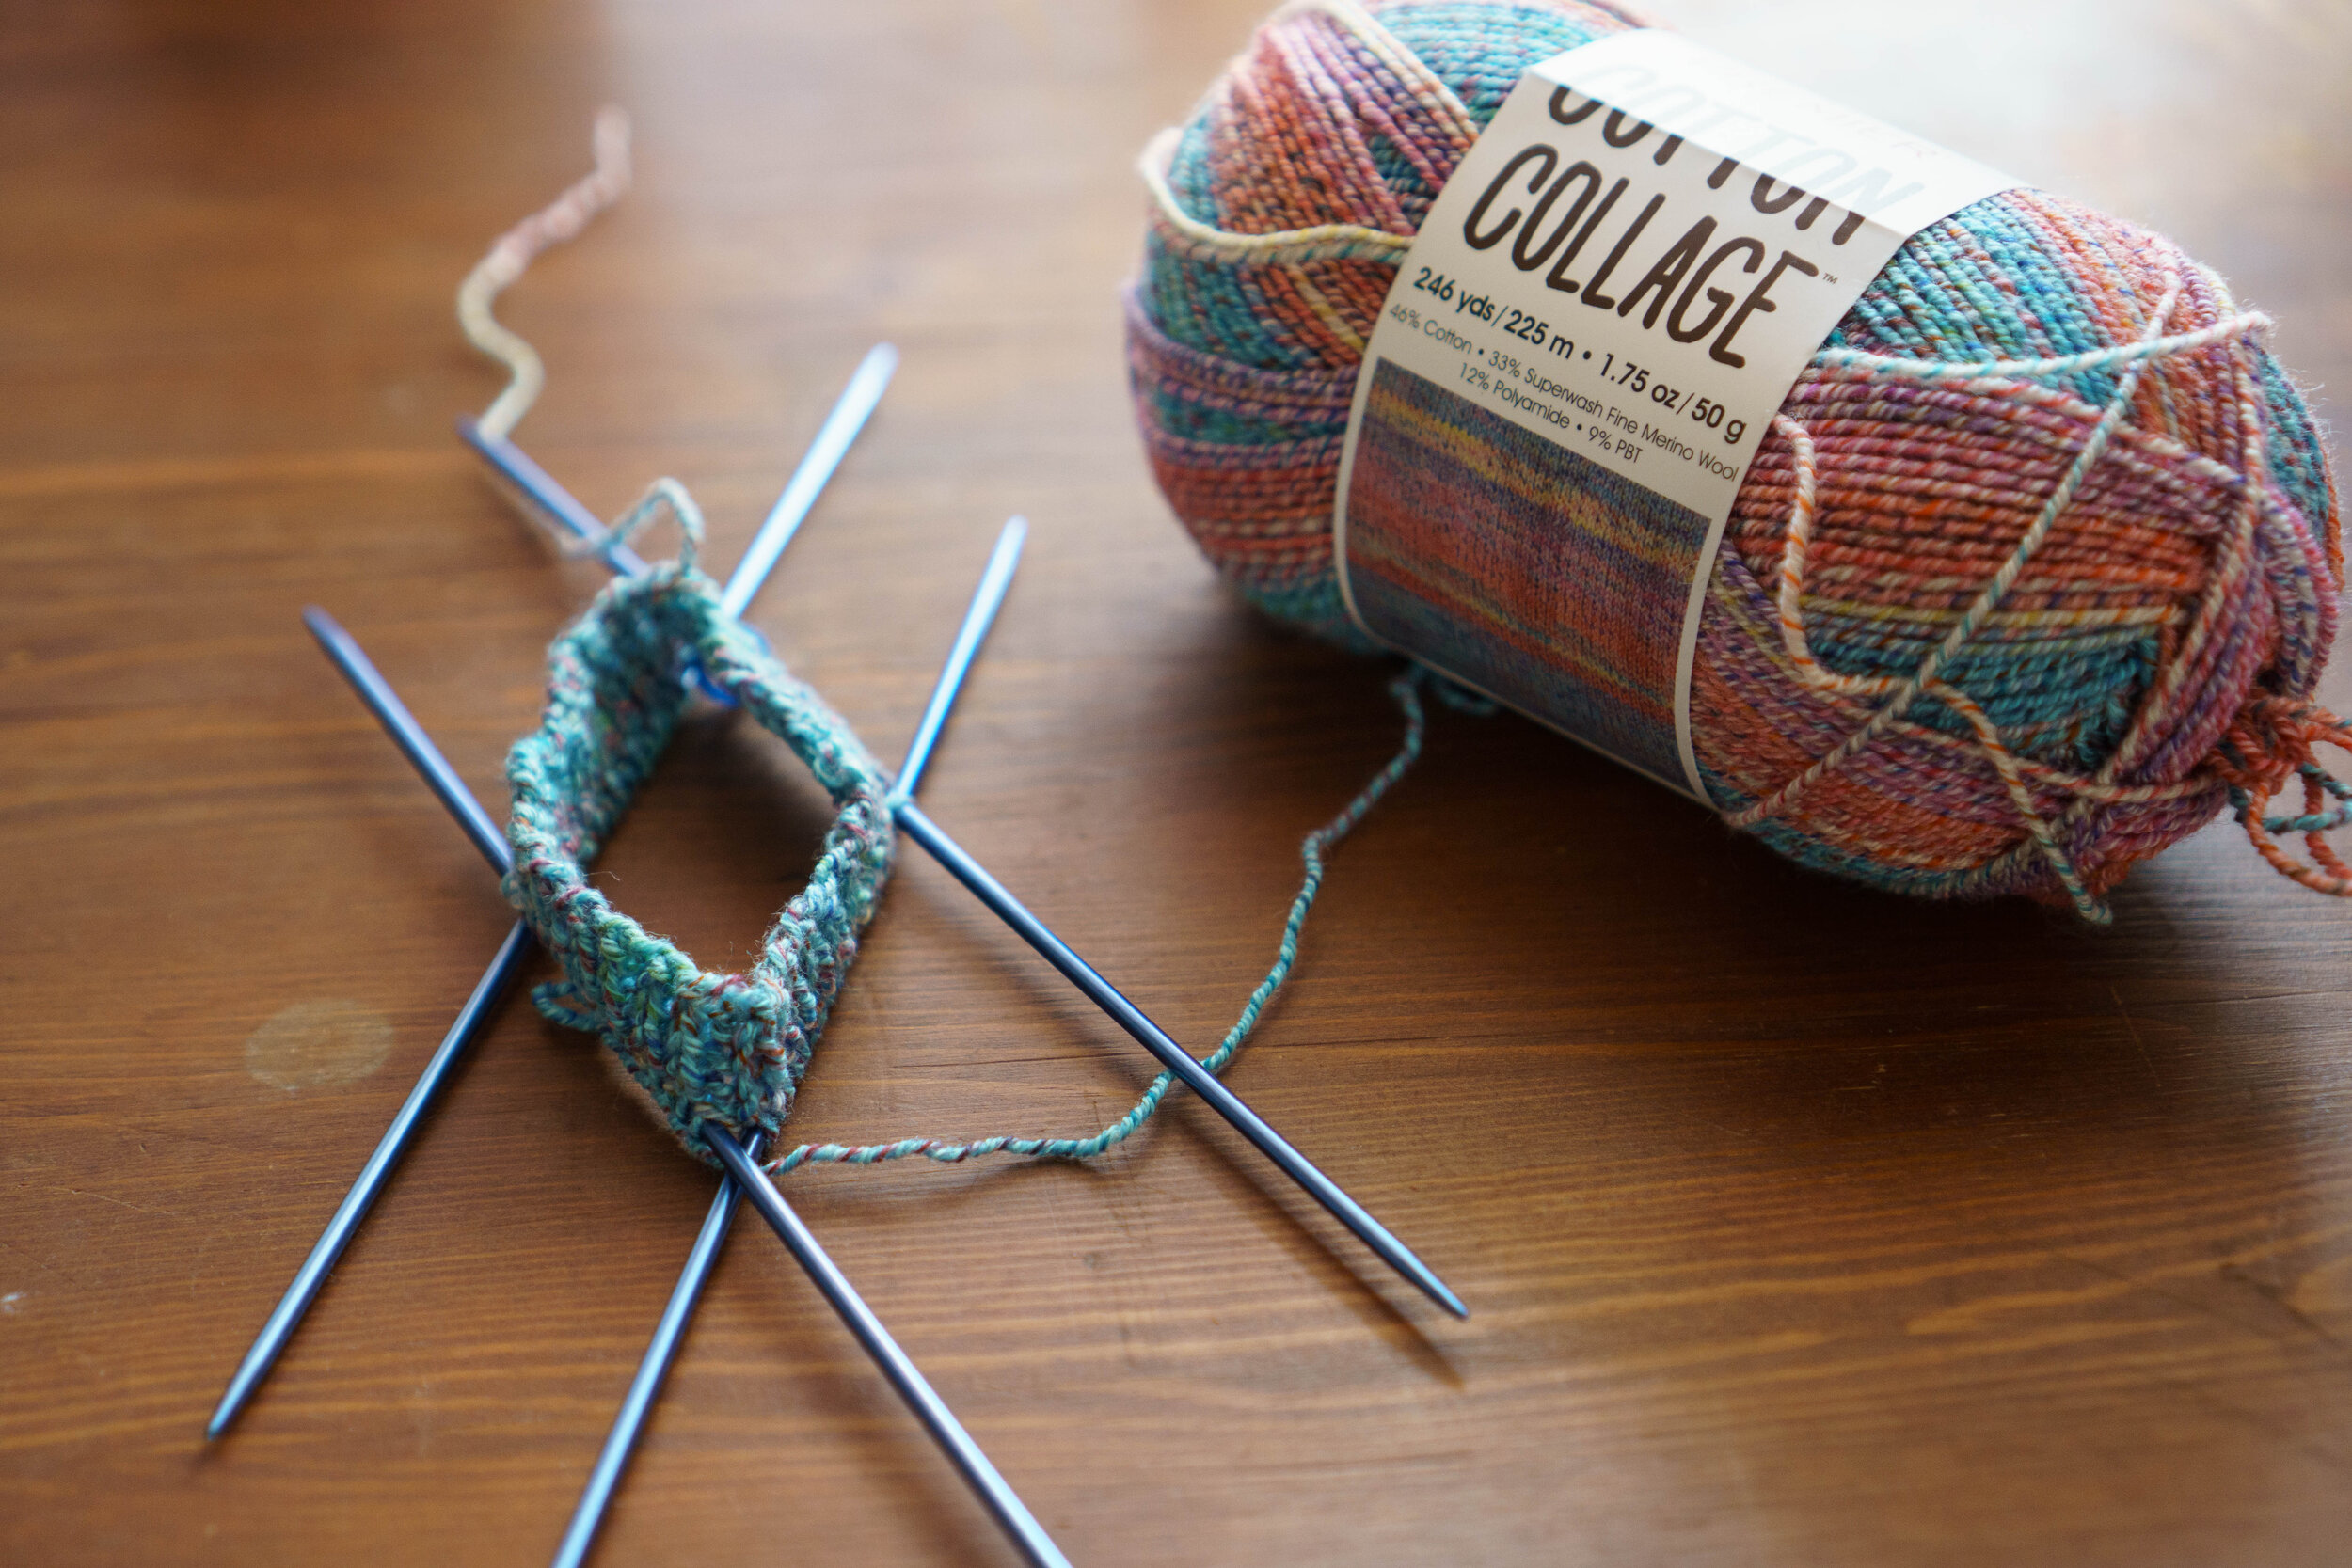 Basic knitting supplies for beginners - Everything you need to get started